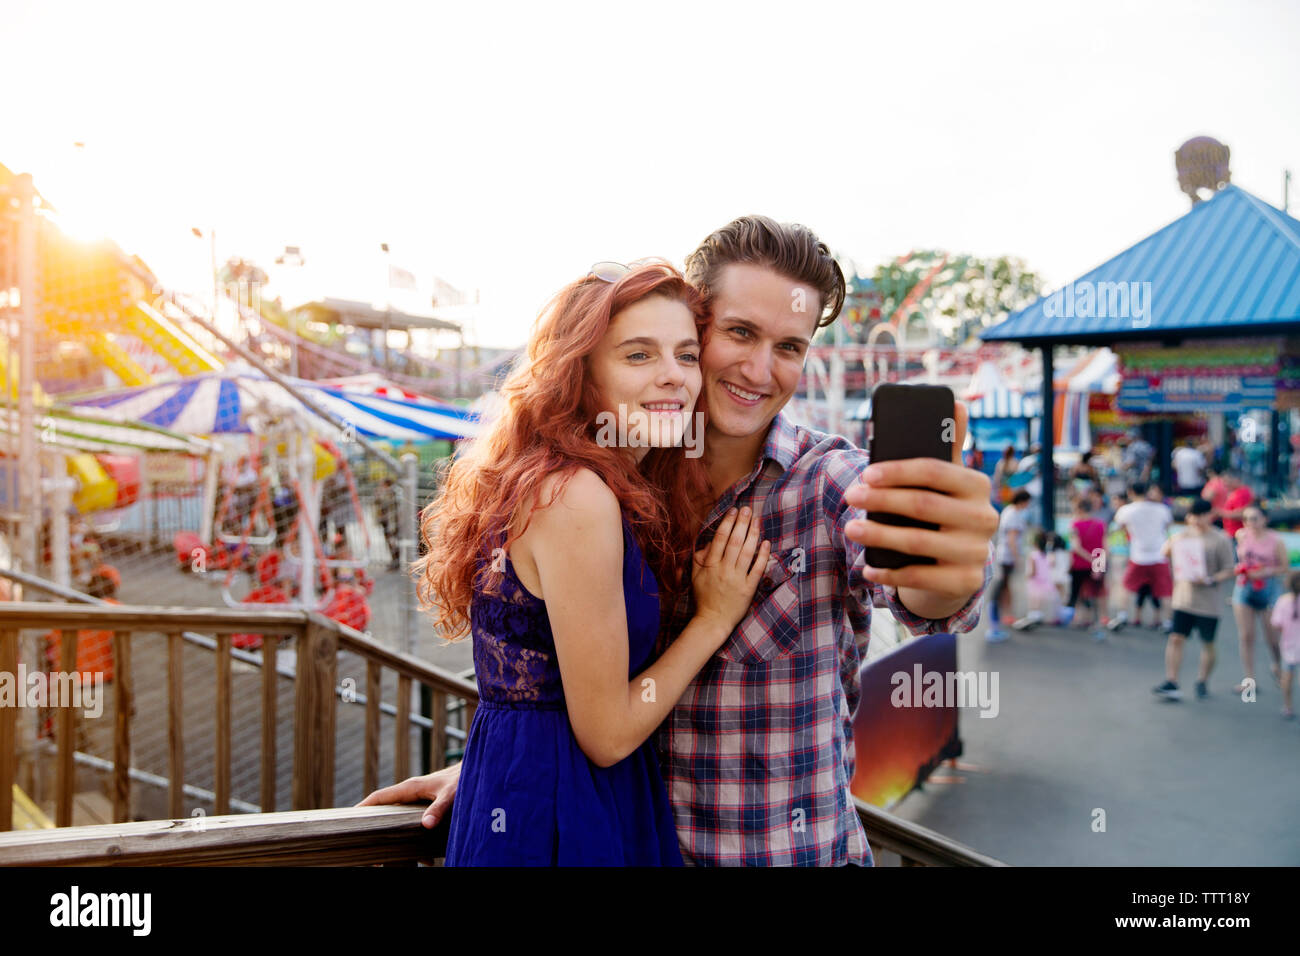 Young couple taking selfie at amusement park Stock Photo